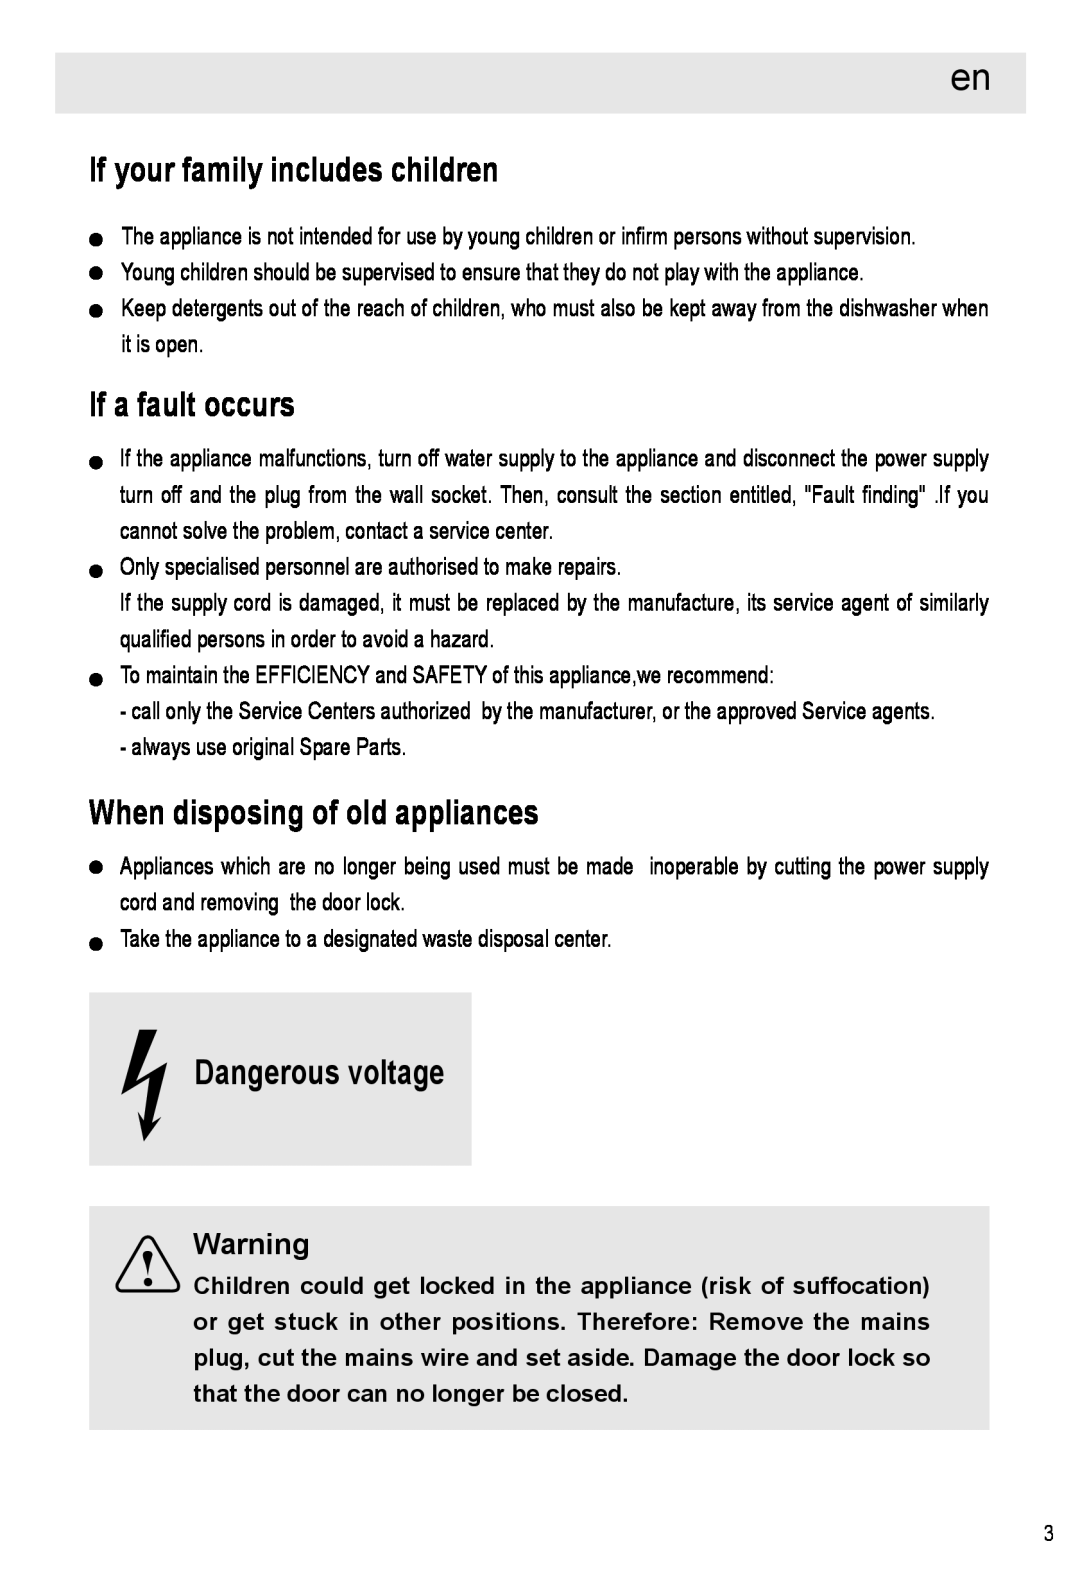 Haier HDW12-SFE1 If your family includes children, If a fault occurs, When disposing of old appliances, Dangerous voltage 